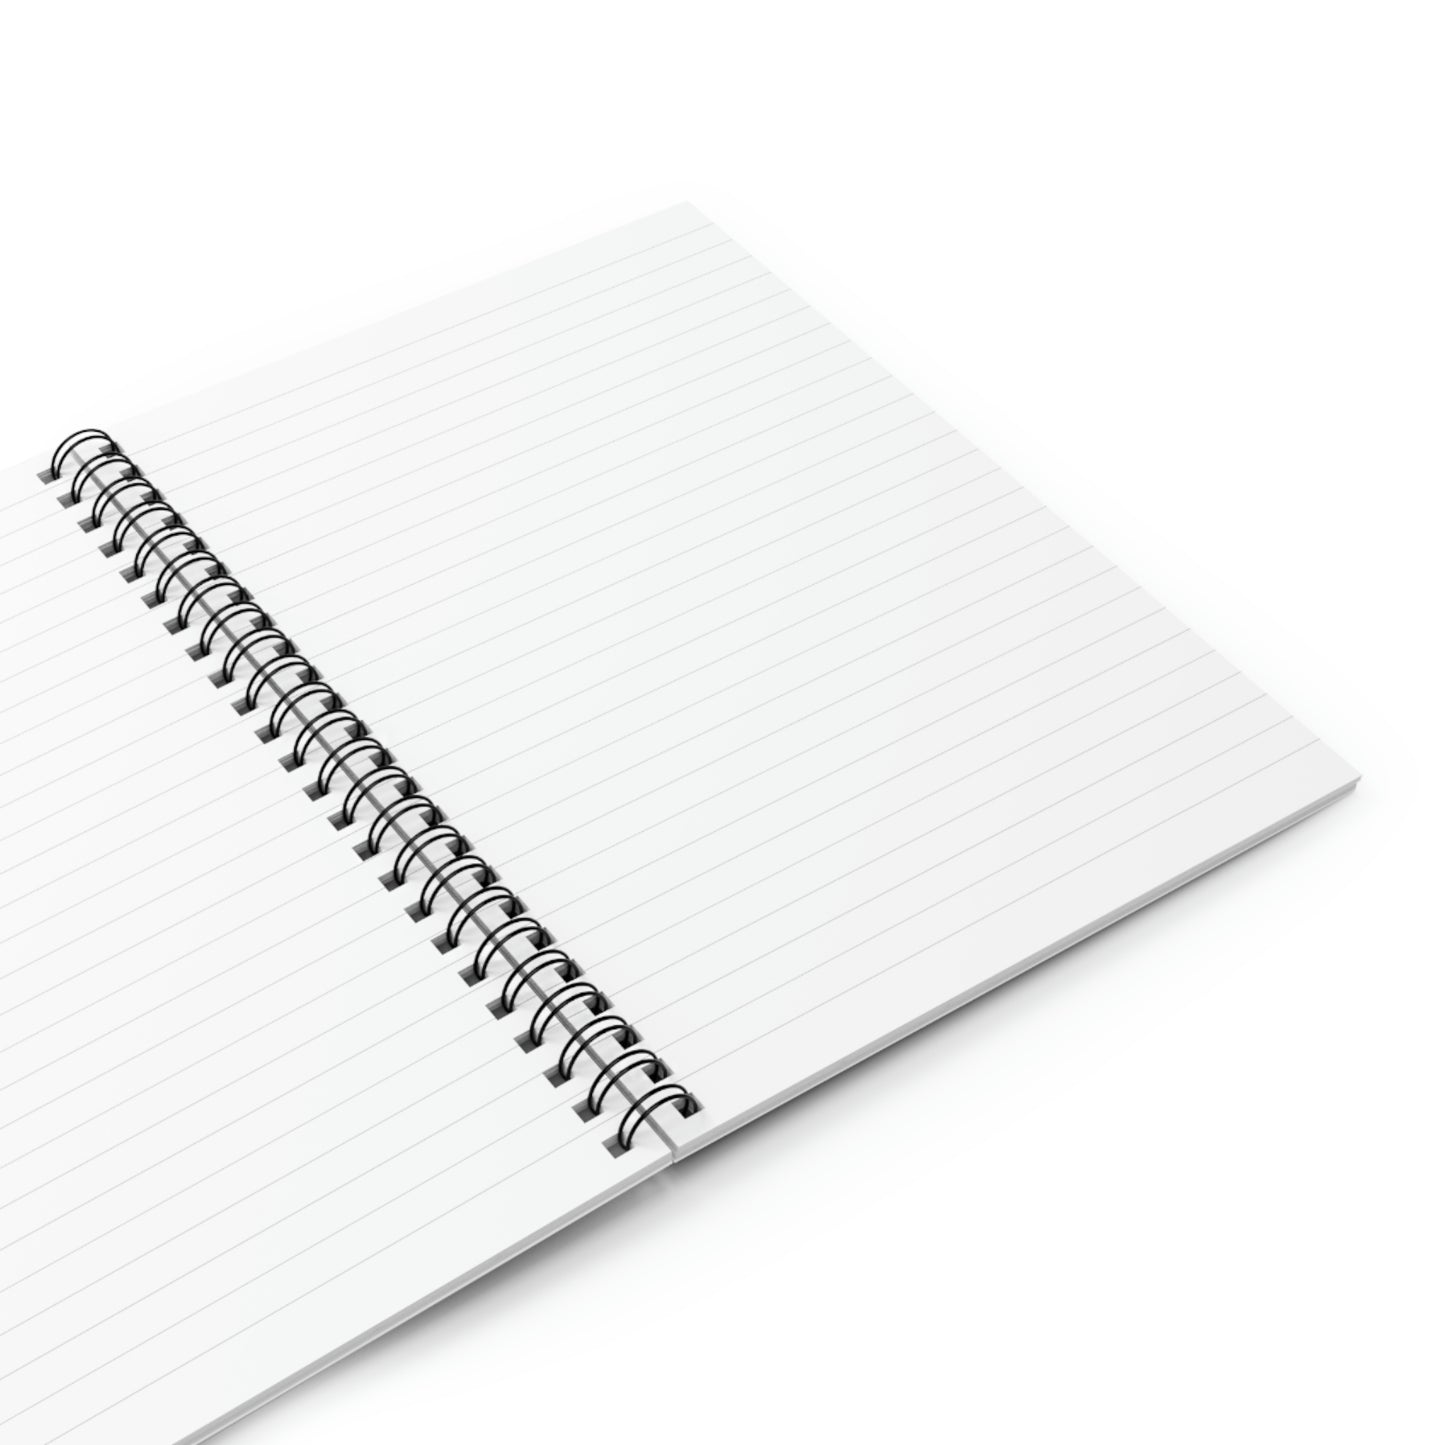 Catherine Hayford, Family Time Spiral Notebook - Ruled Line